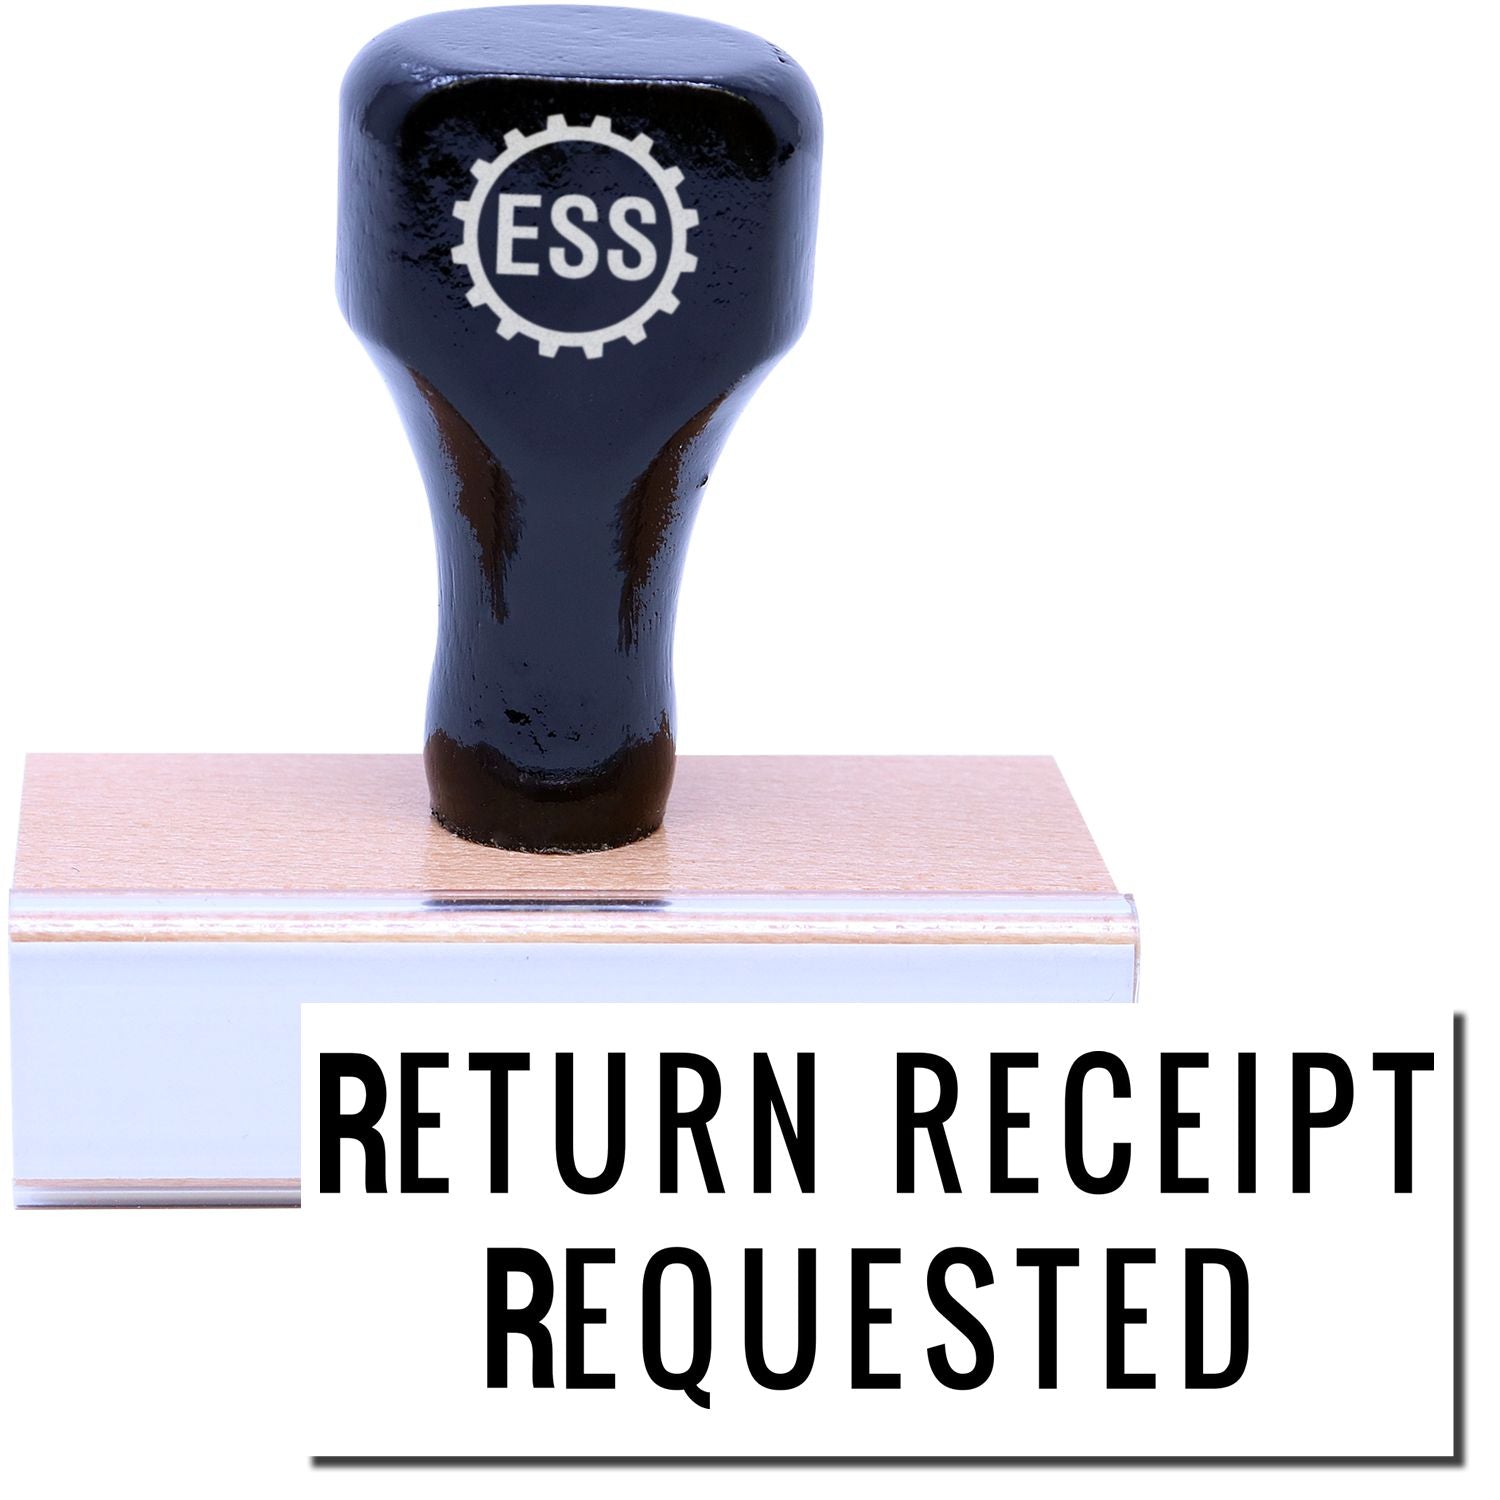 A stock office rubber stamp with a stamped image showing how the text "RETURN RECEIPT REQUESTED" in a narrow font is displayed after stamping.